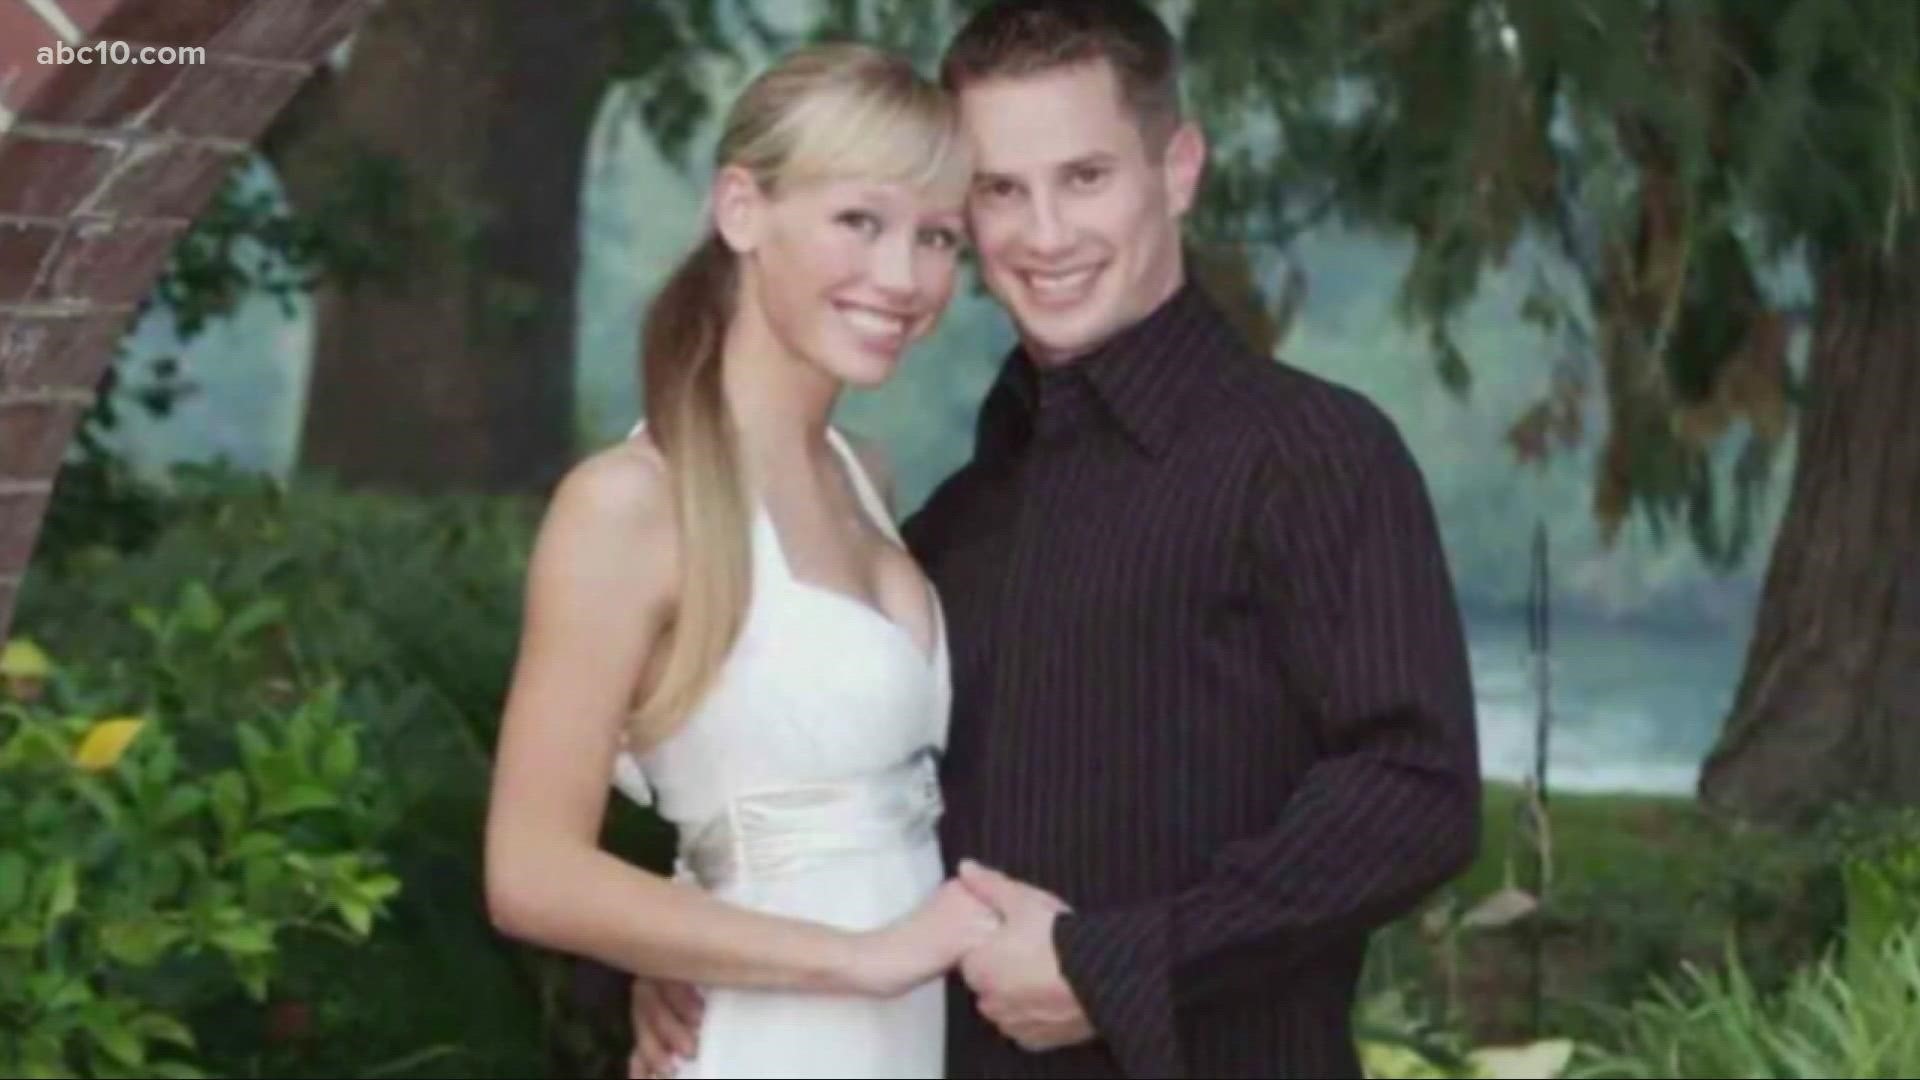 Sherri Papini accepts plea deal, admitting kidnapping was a hoax